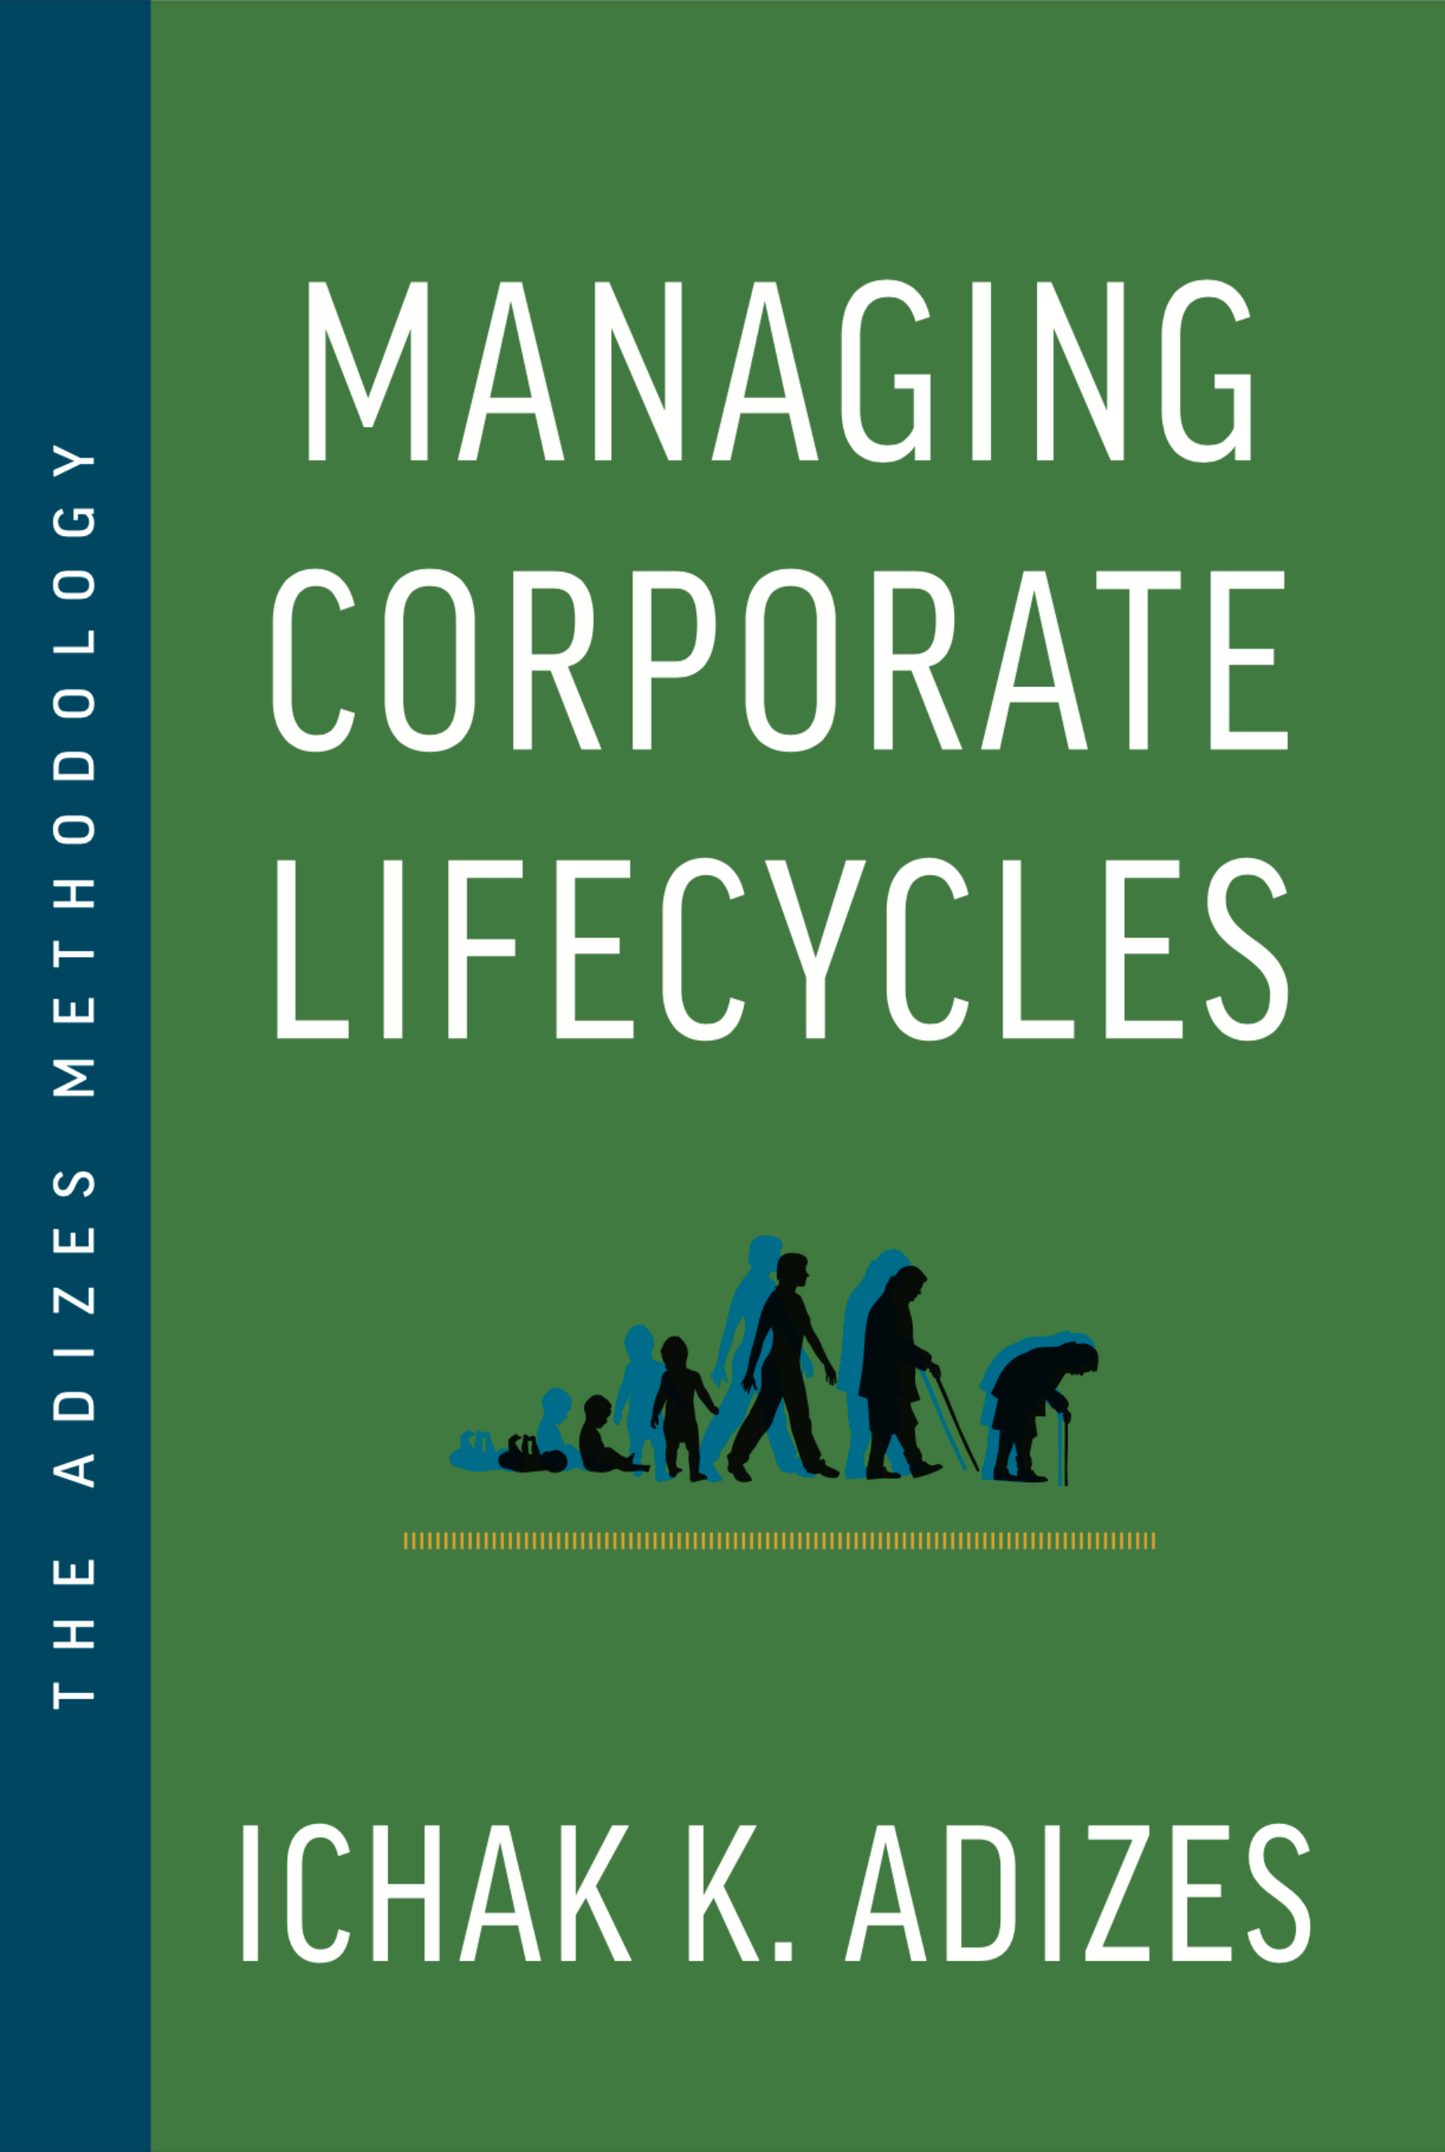 Managing Corporate Lifecycle (English)